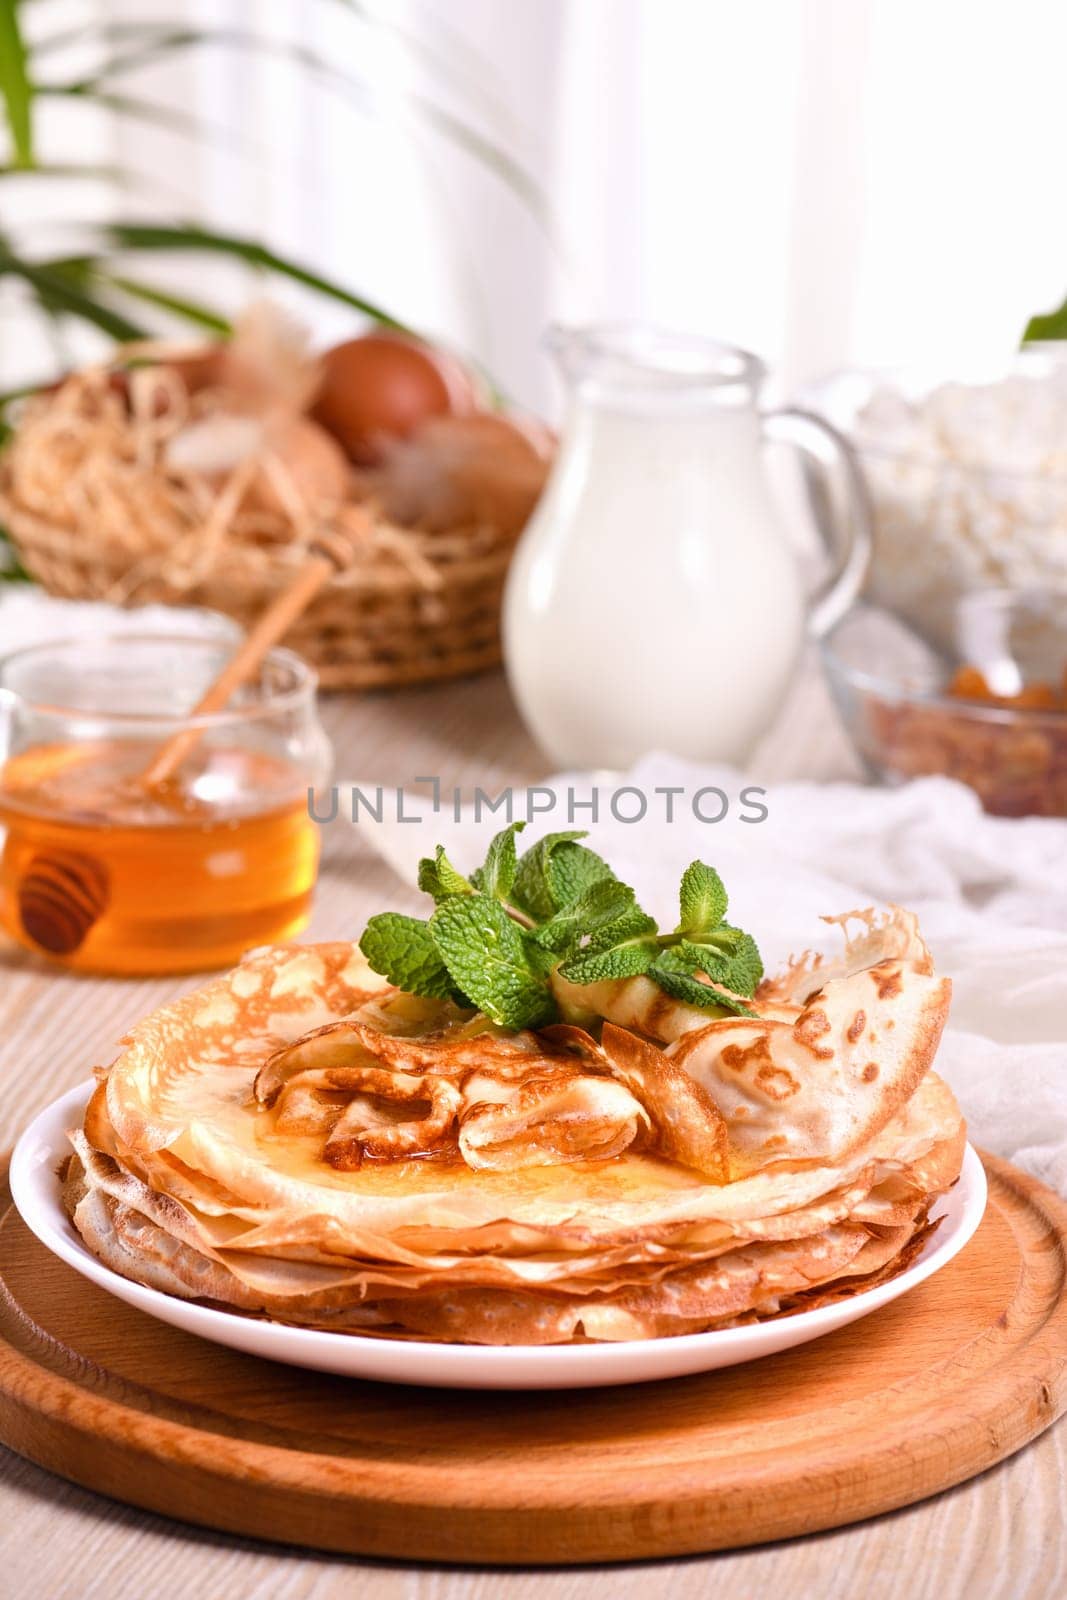 Homemade thin crepe (pancakes) with honey by Apolonia